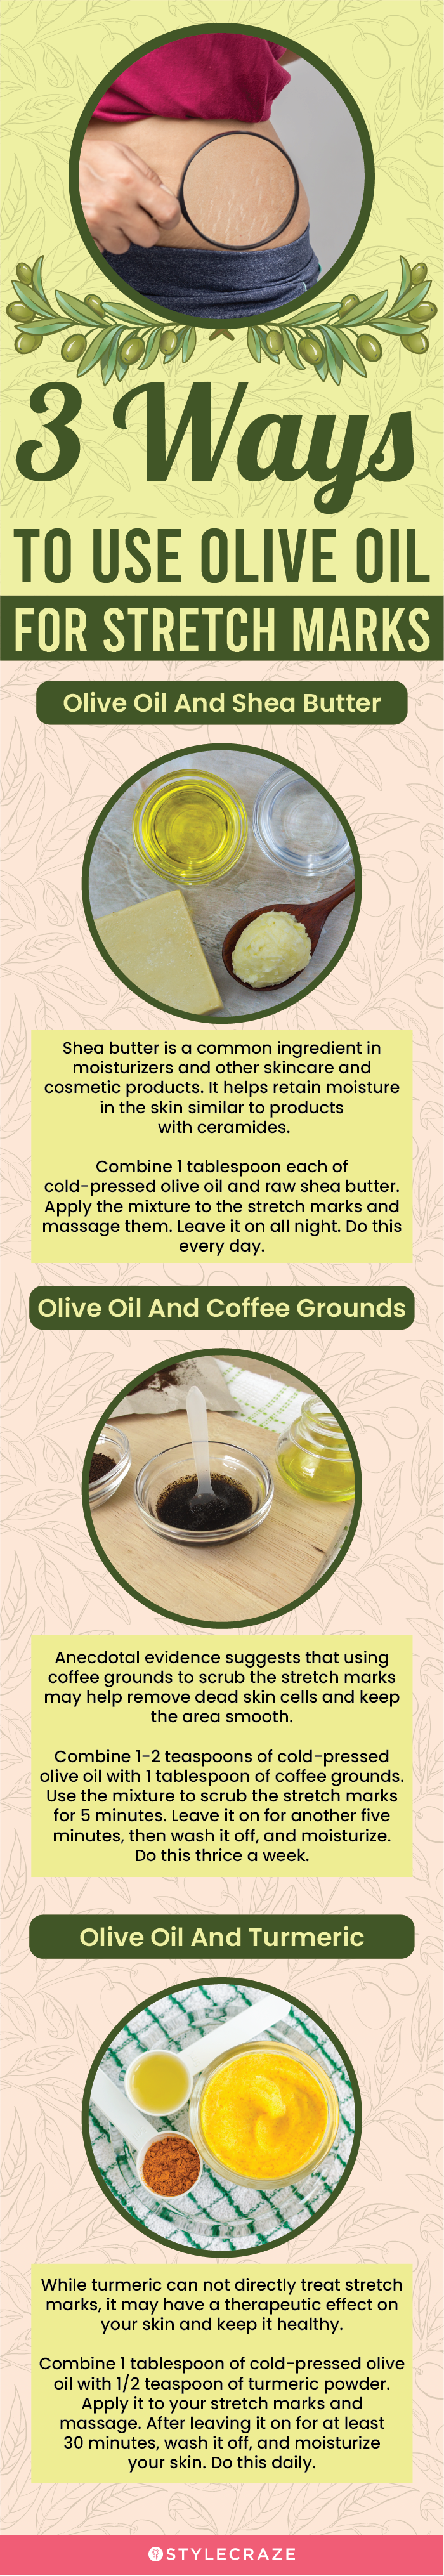 3 ways to use olive oil for stretch marks (infographic)